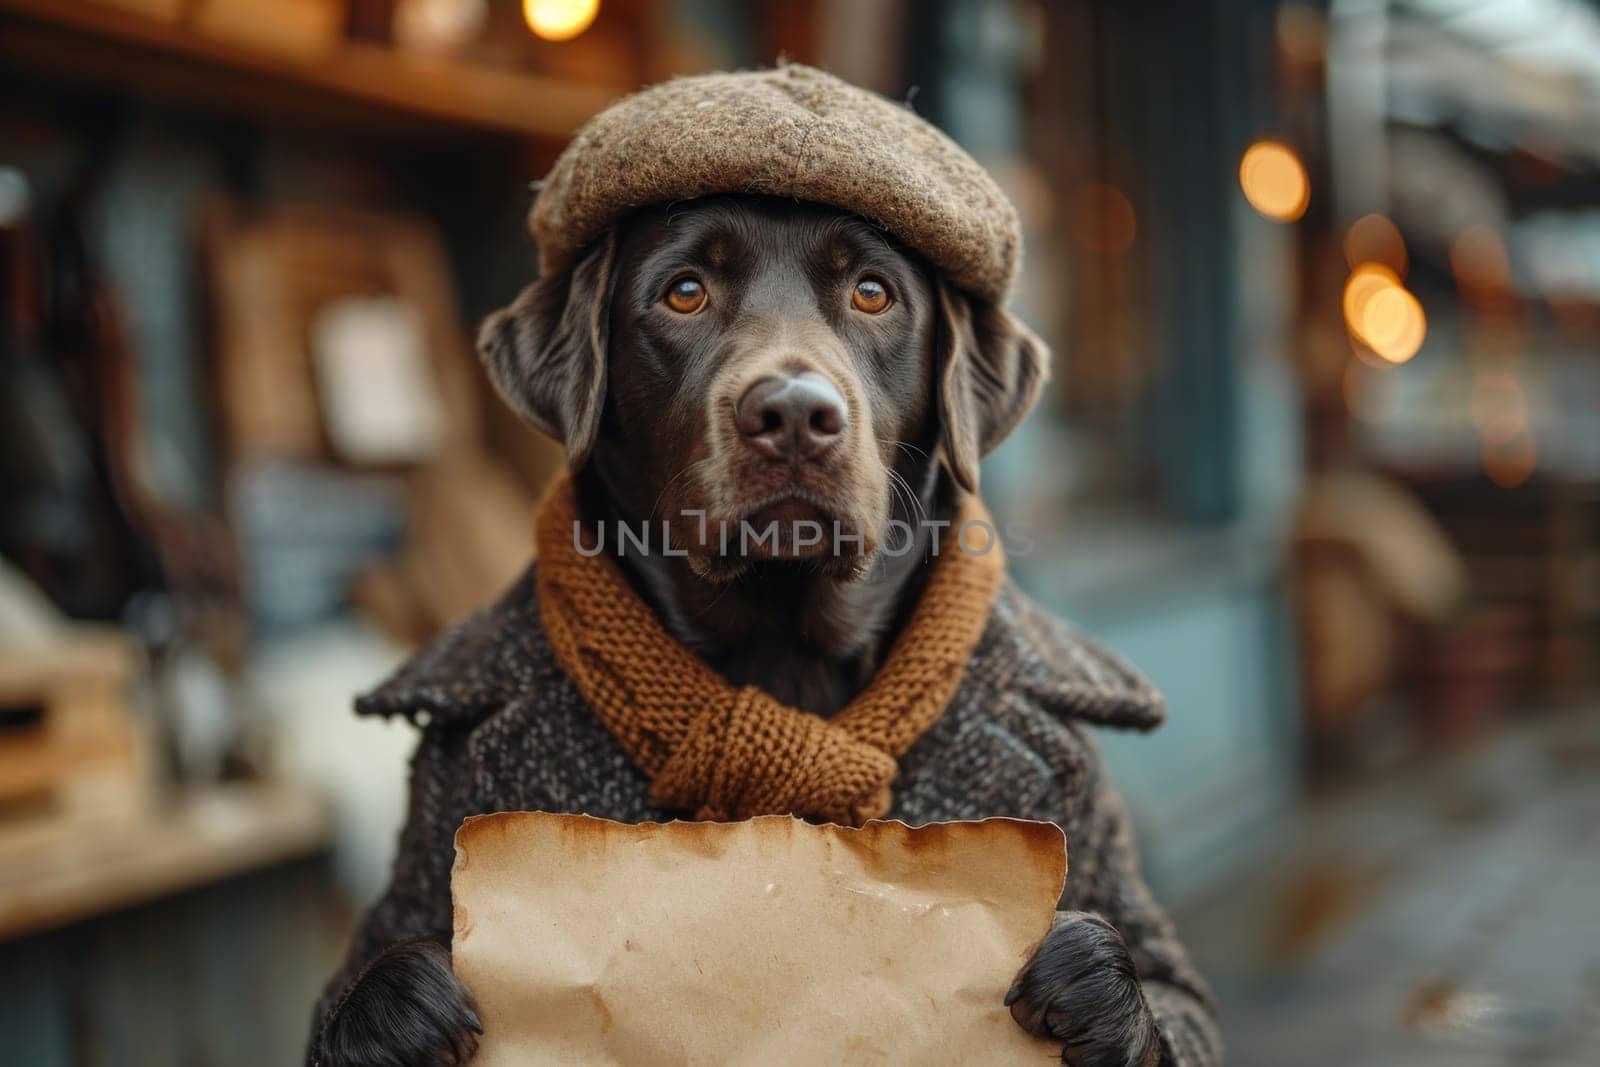 A dog in a hat and clothes reads a letter sitting in the interior by Lobachad